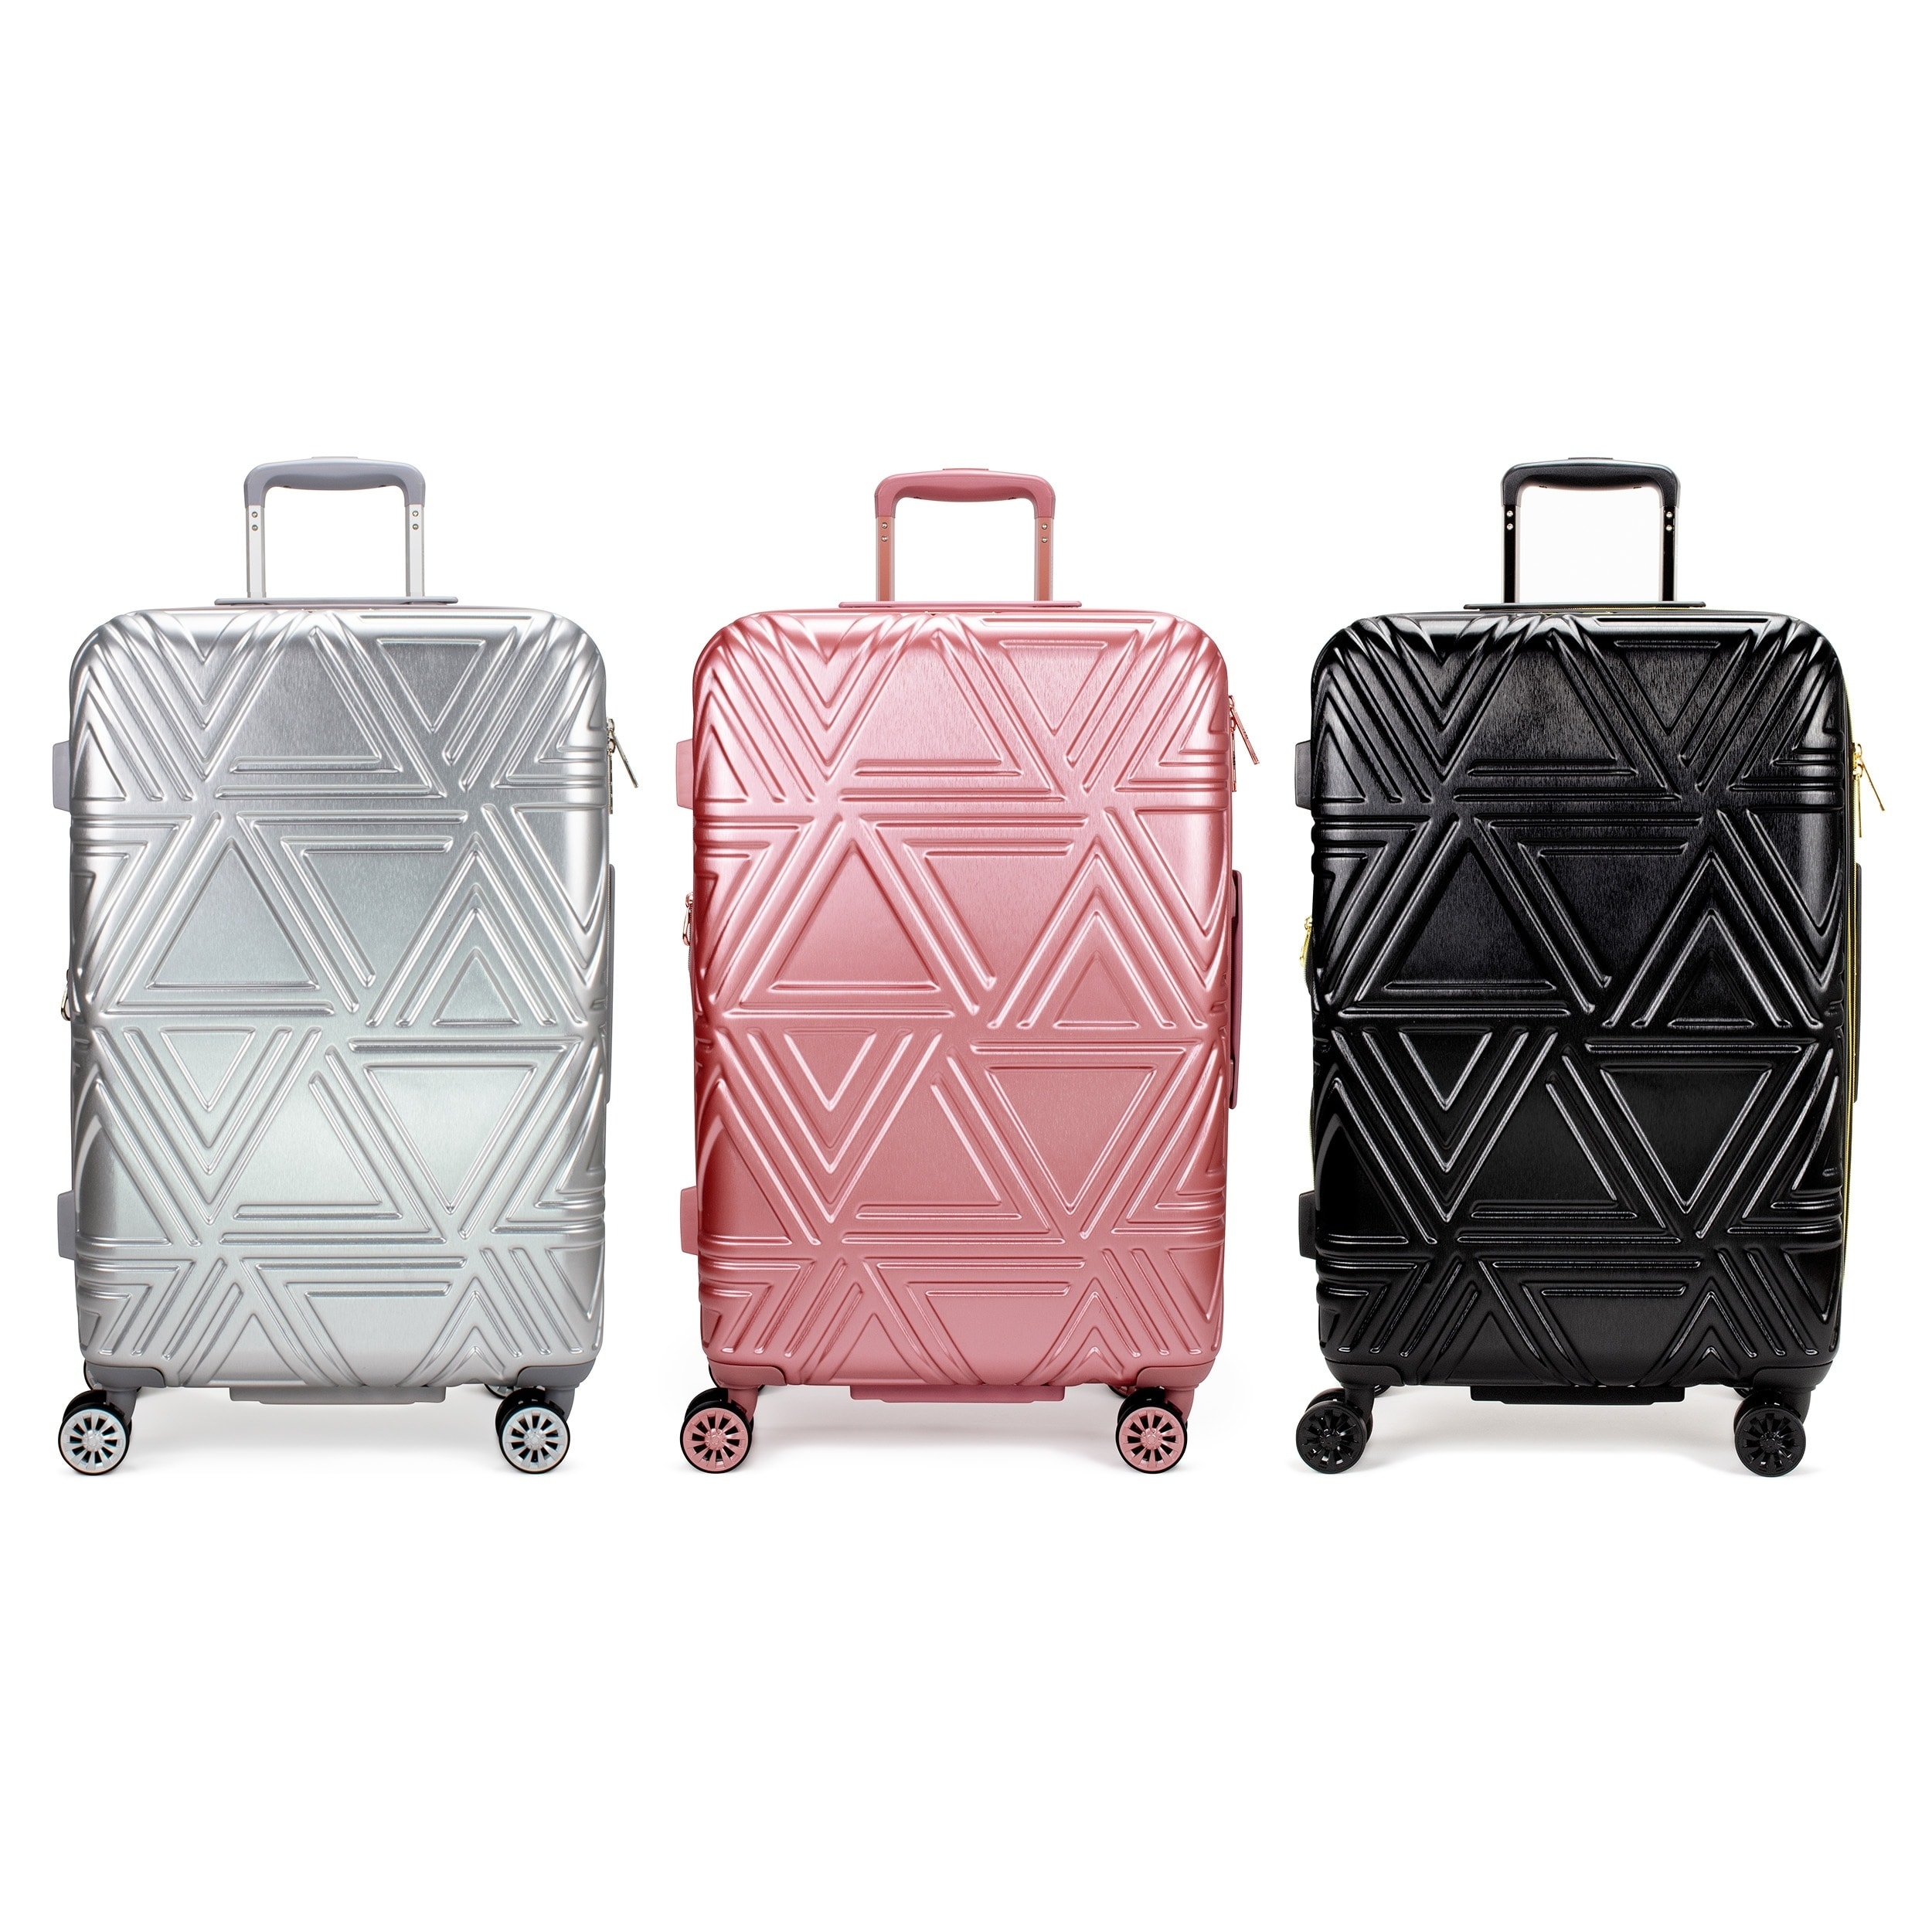 Badgley Mischka Expandable Luggage Set in Pink